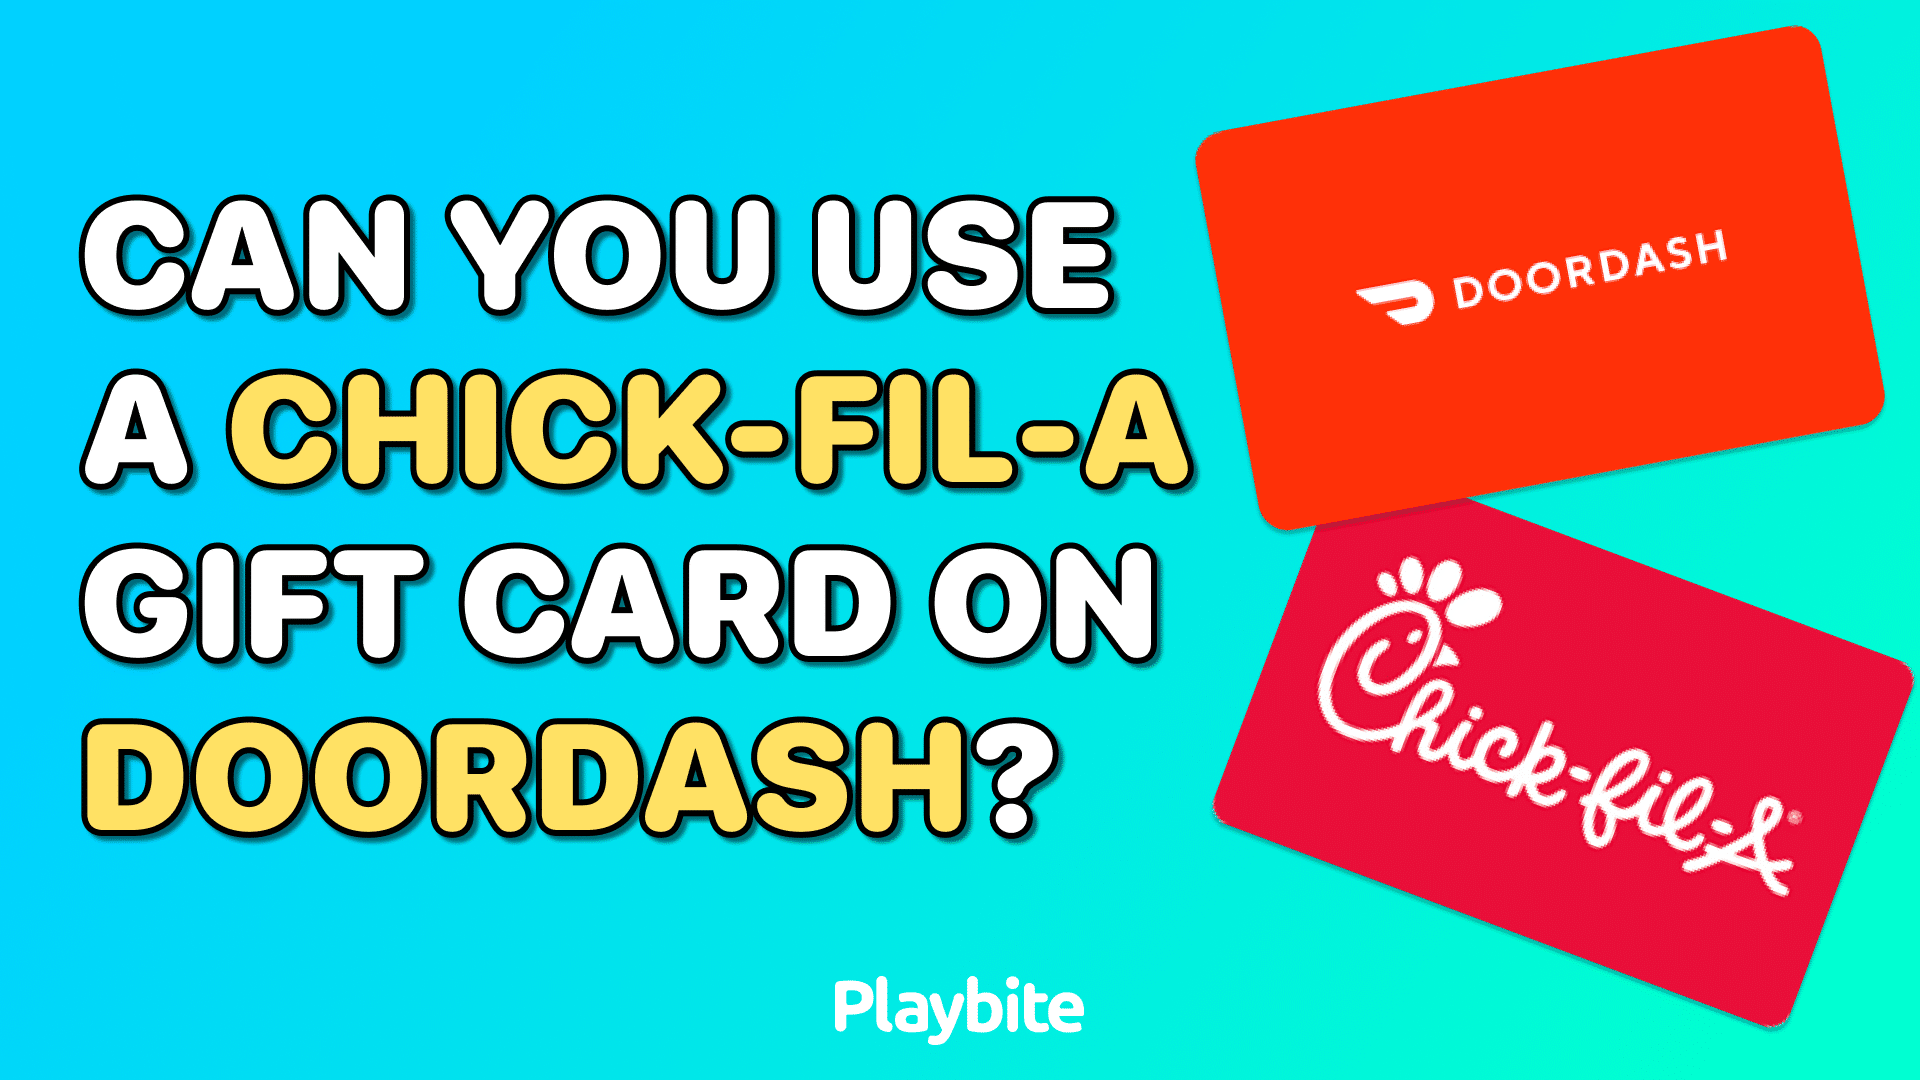 Can You Use A Chick-Fil-A Gift Card On DoorDash?